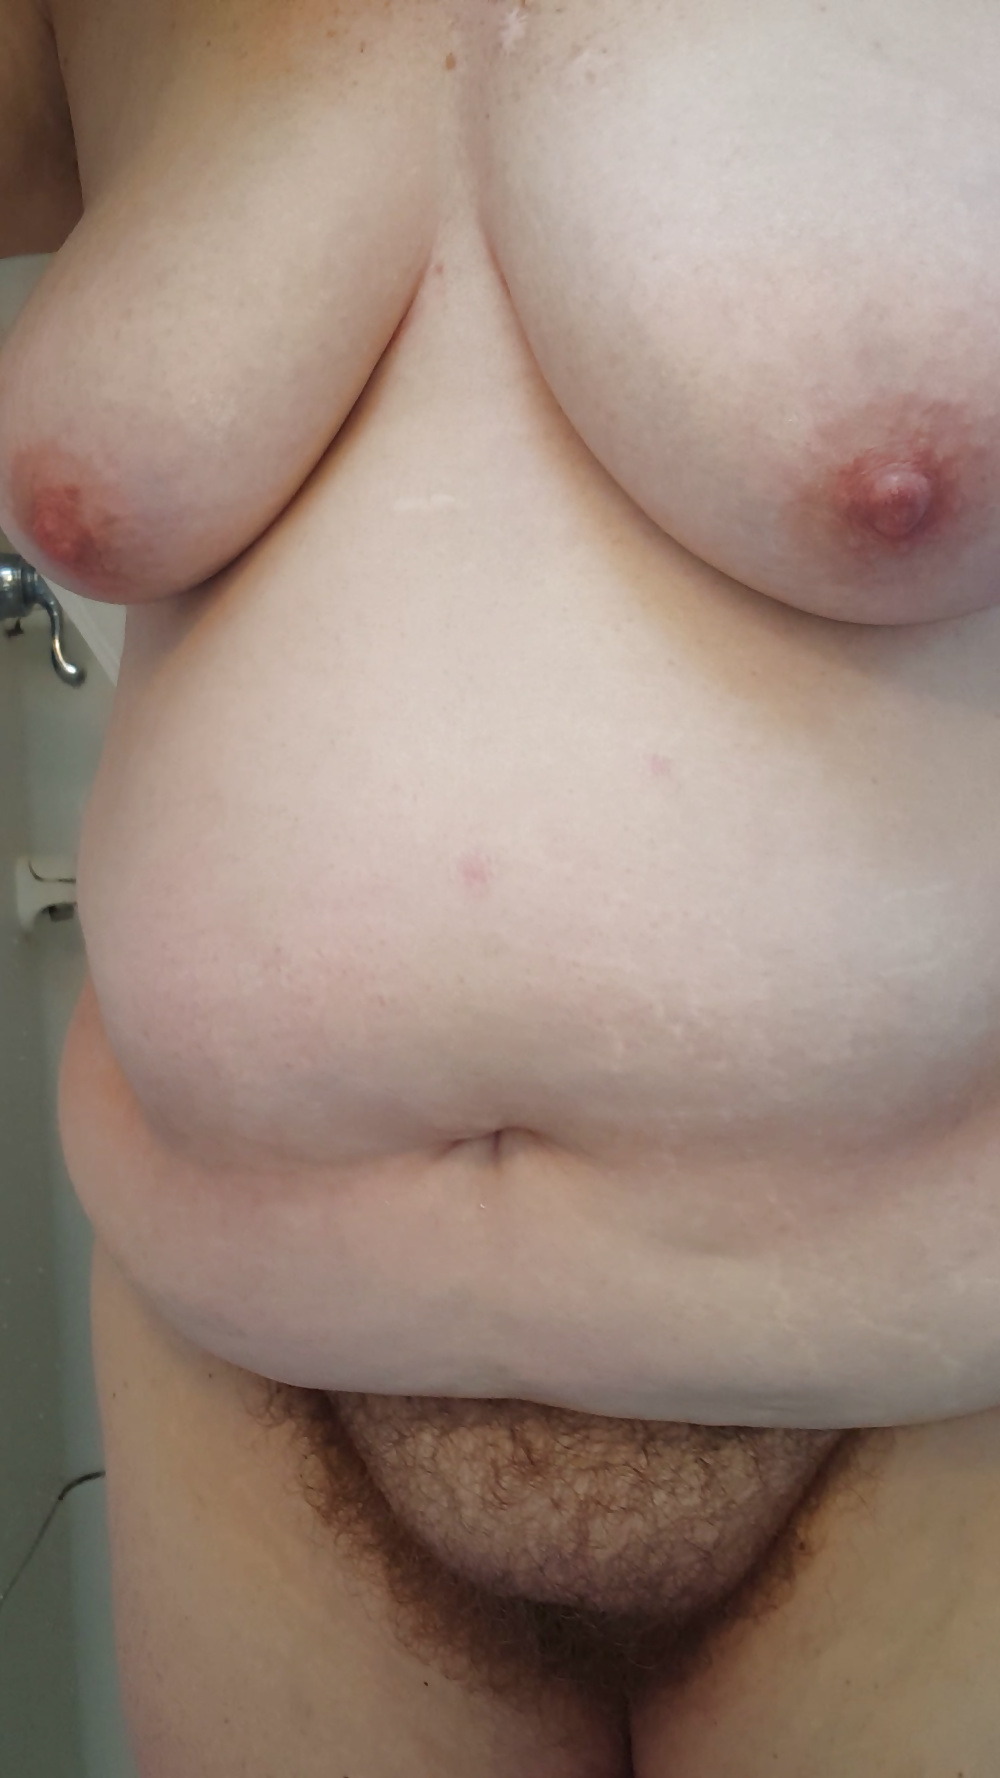 My Wifes Hairy Pussy Big Titsnipples And Bbw Body 23 Pics Xhamster